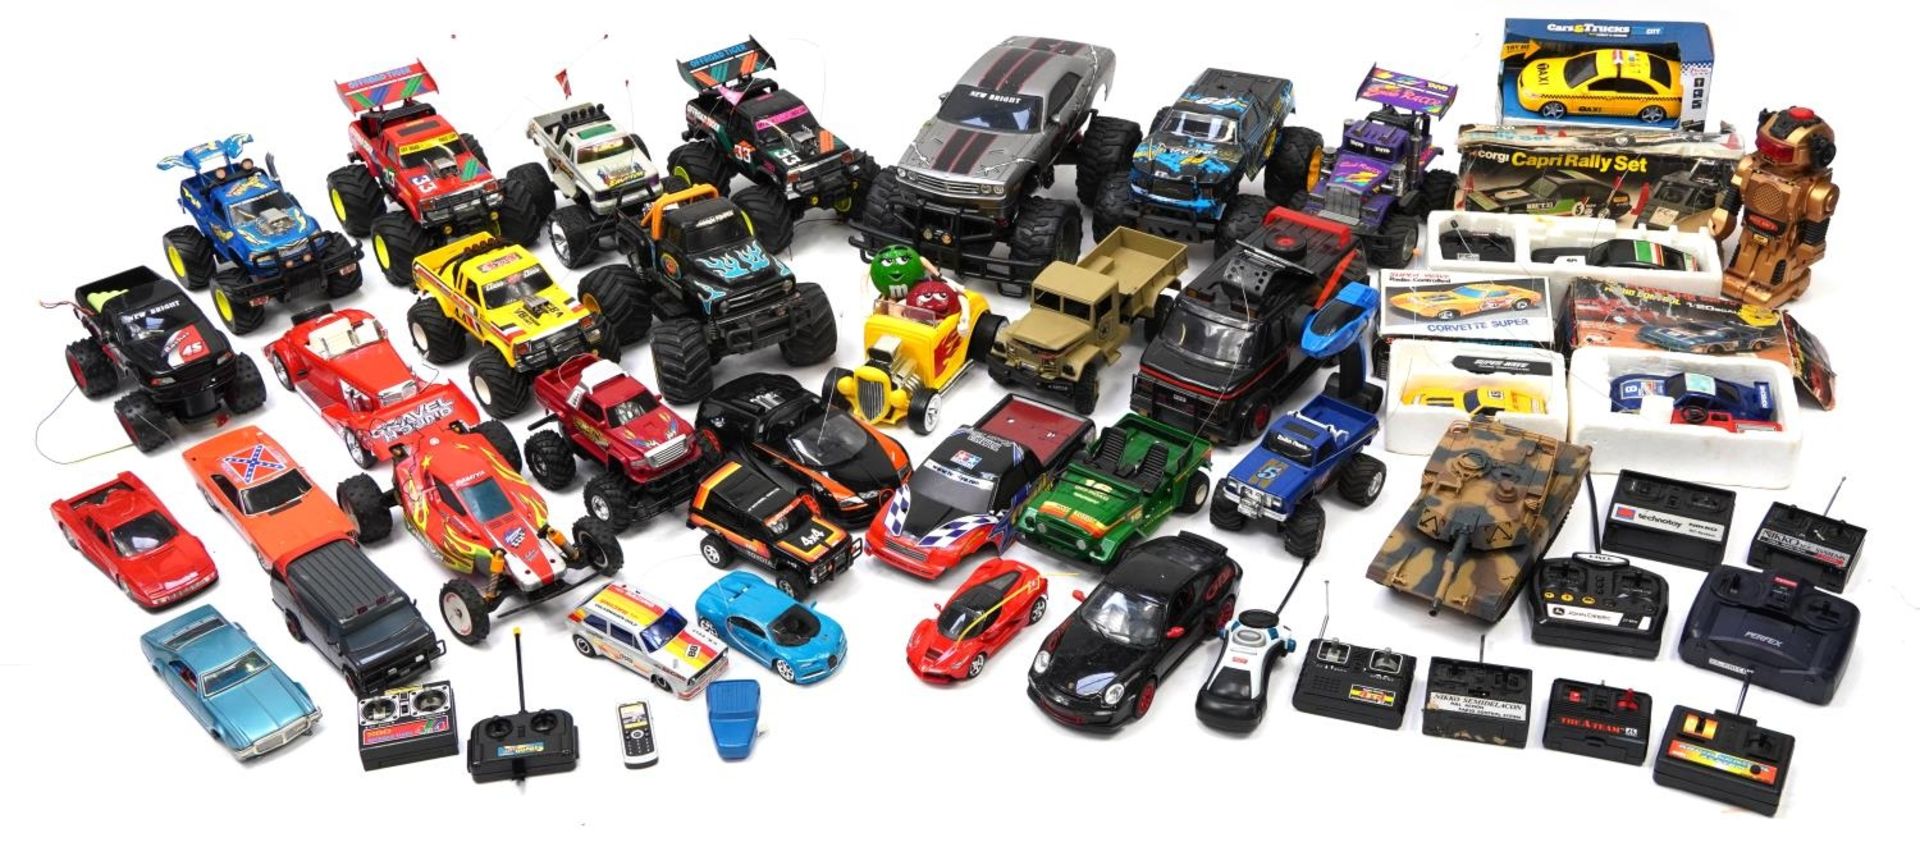 Large collection of vintage and later model remote control vehicles : For further information on